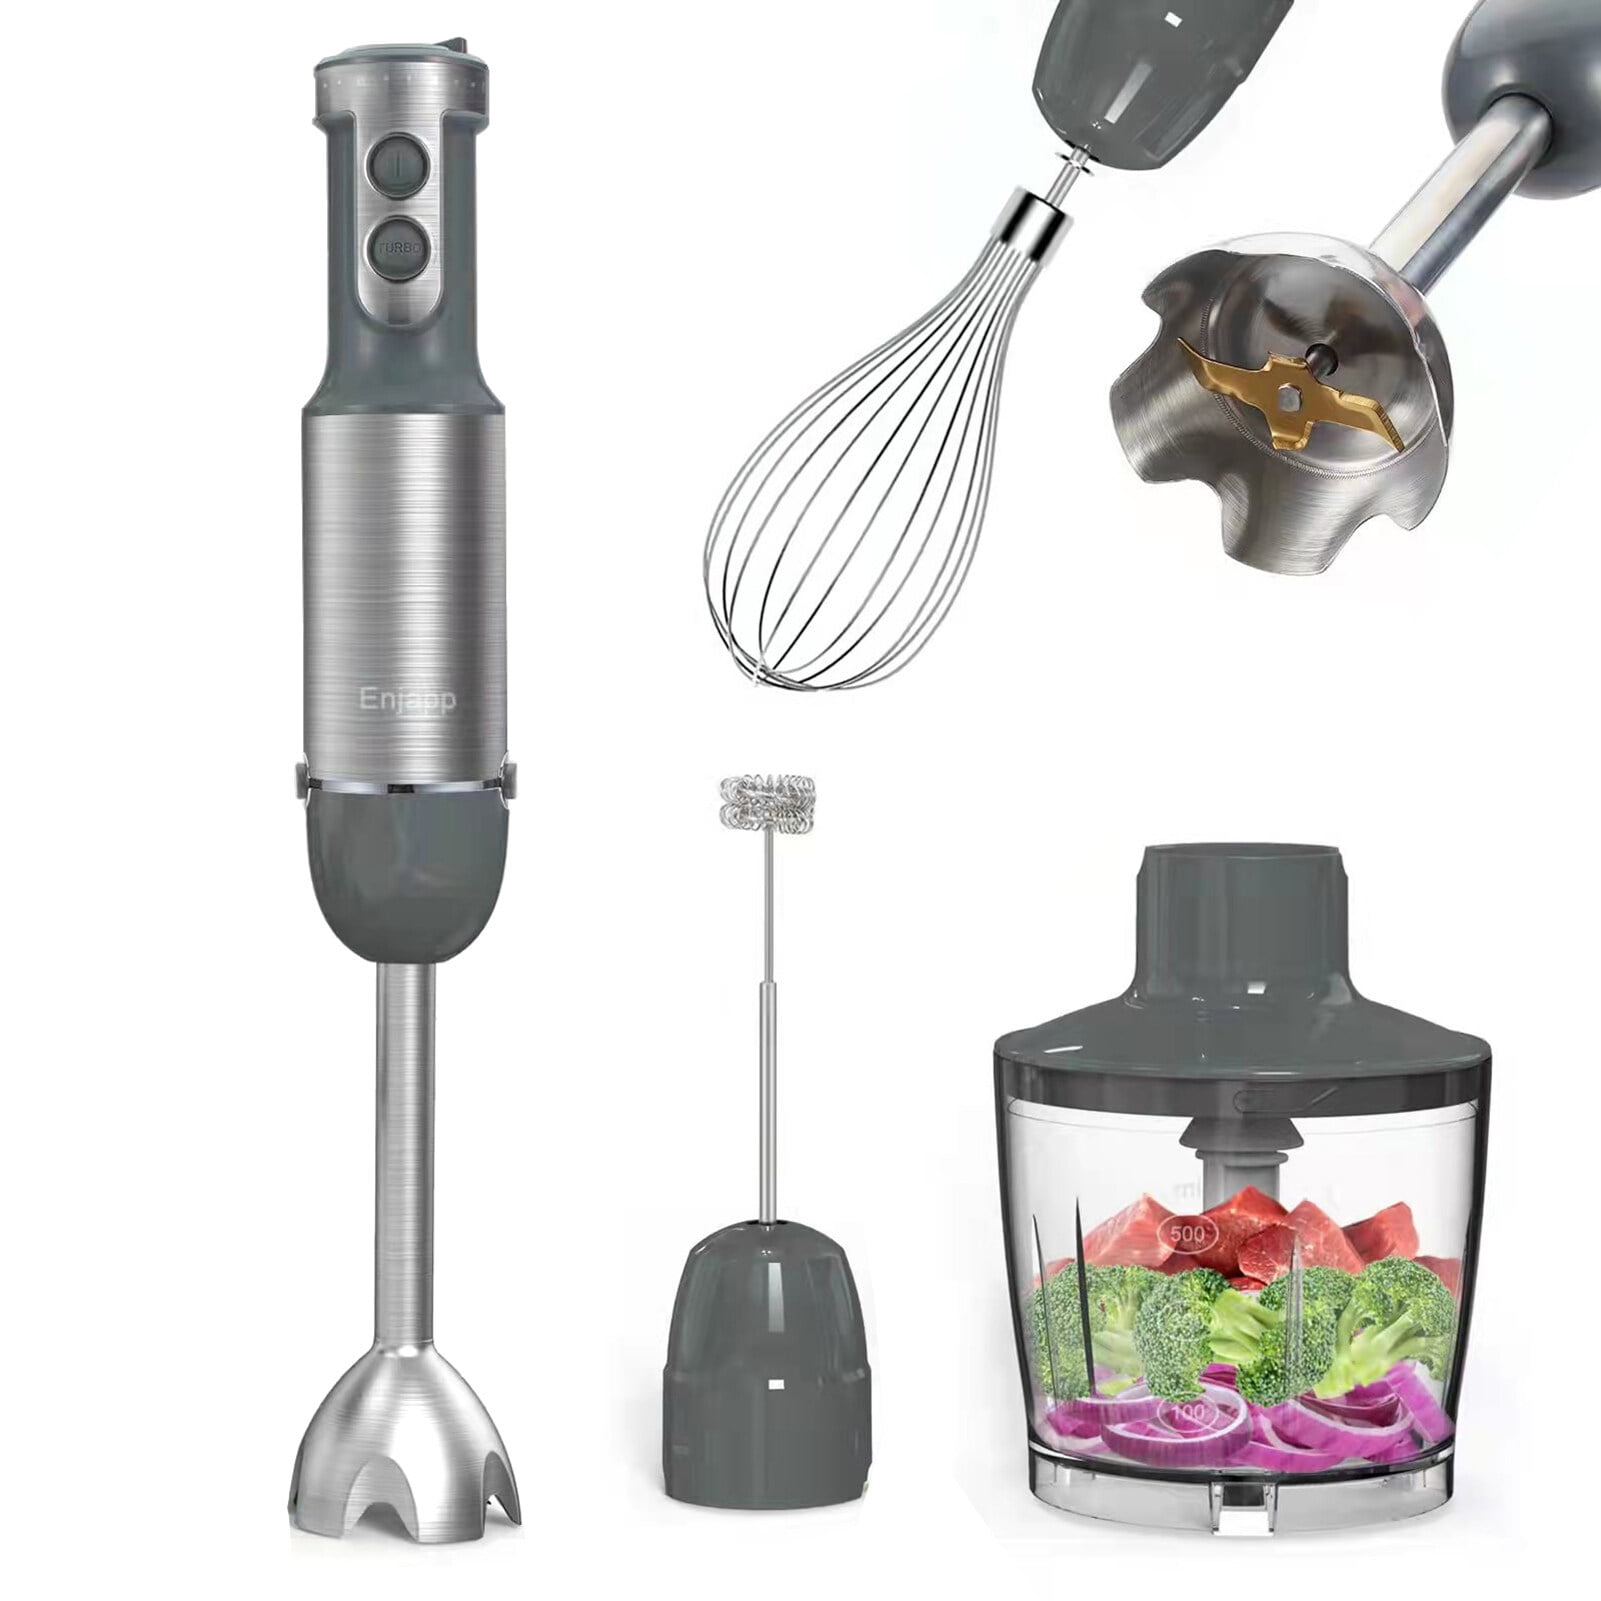  Immersion Hand Blender,5 in1 Emulsion Blender 800W 20 Speed,  500ML Chopper, 600ML Beaker, Stainless Steel Whisk and Milk Frother for  Smoothie, Baby Food, Sauces,Puree, Soup（BPA-free）: Home & Kitchen